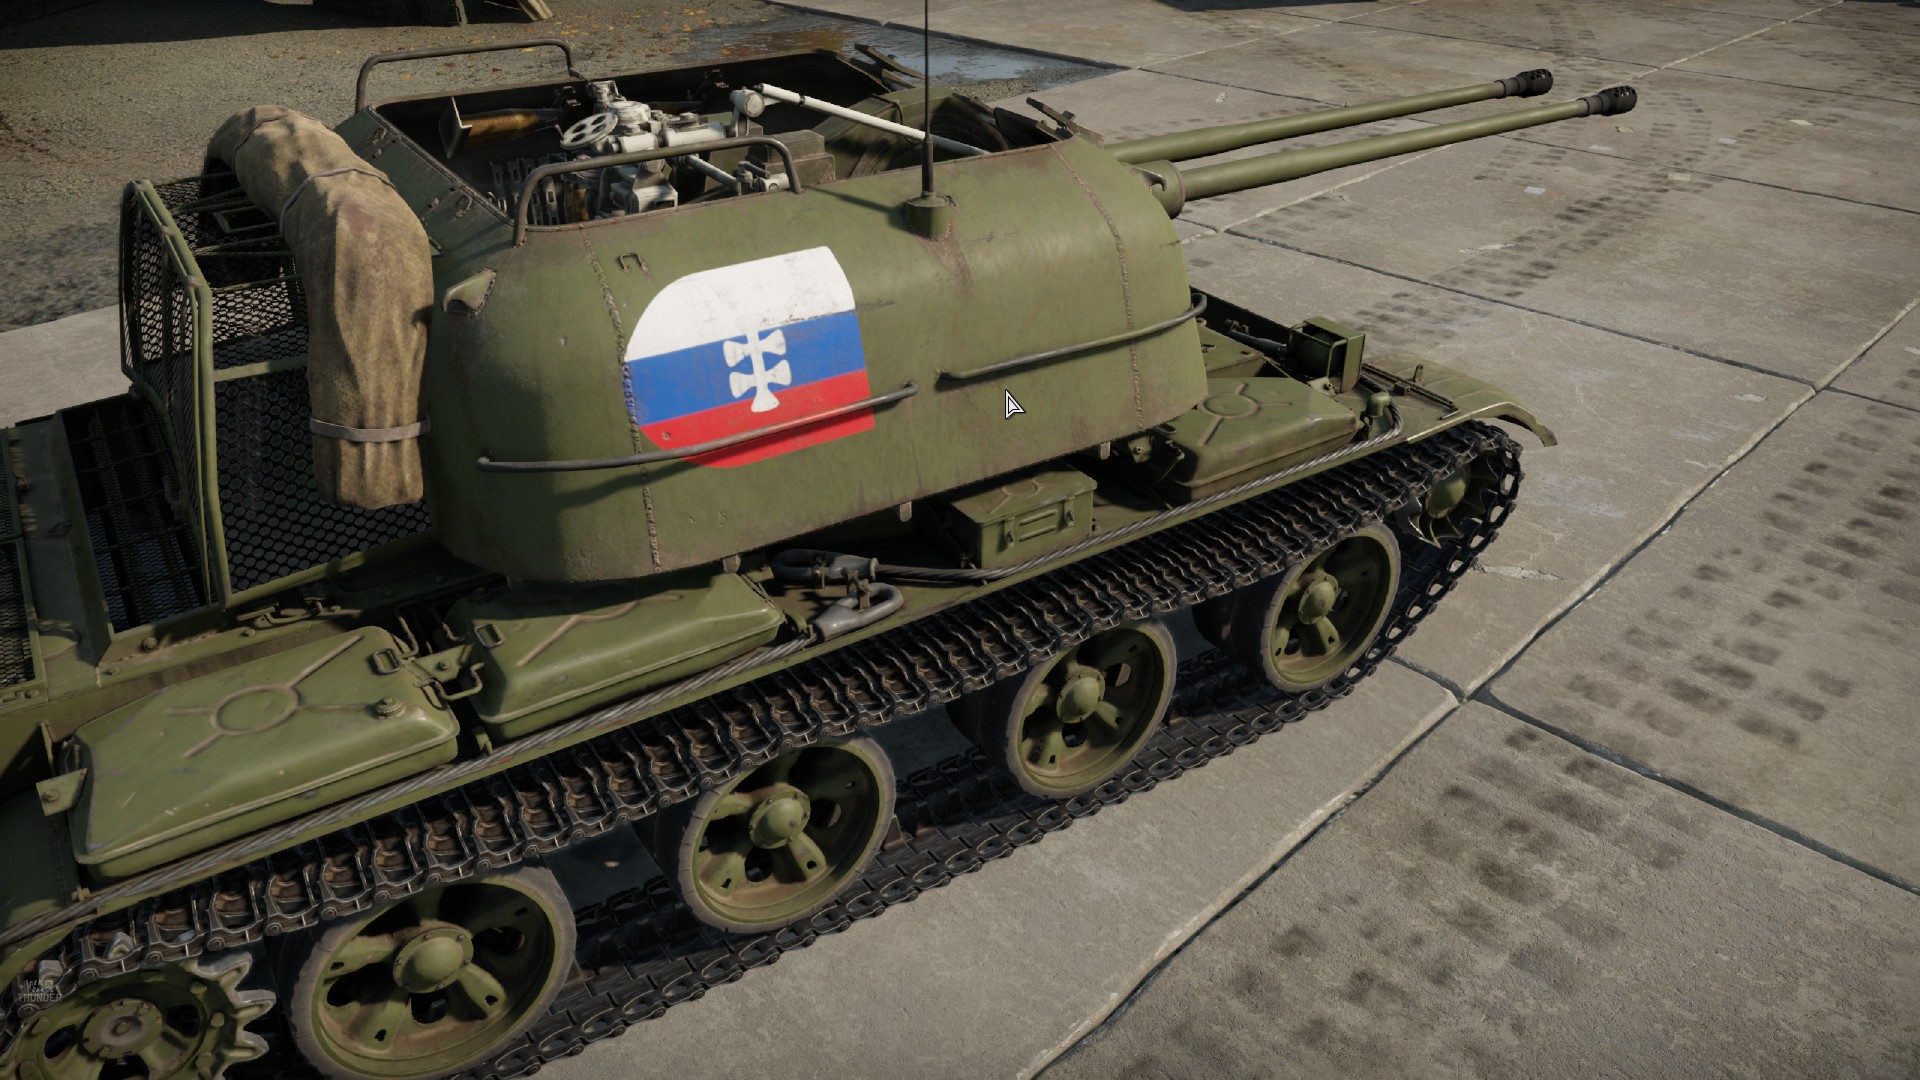 War Thunder - General Guide for Crafting and Secrets - Playthrough - Yugoslavia (Socialist Federal Republic of Yugoslavia & Democratic Federal Yugoslavia) - 8020CCF